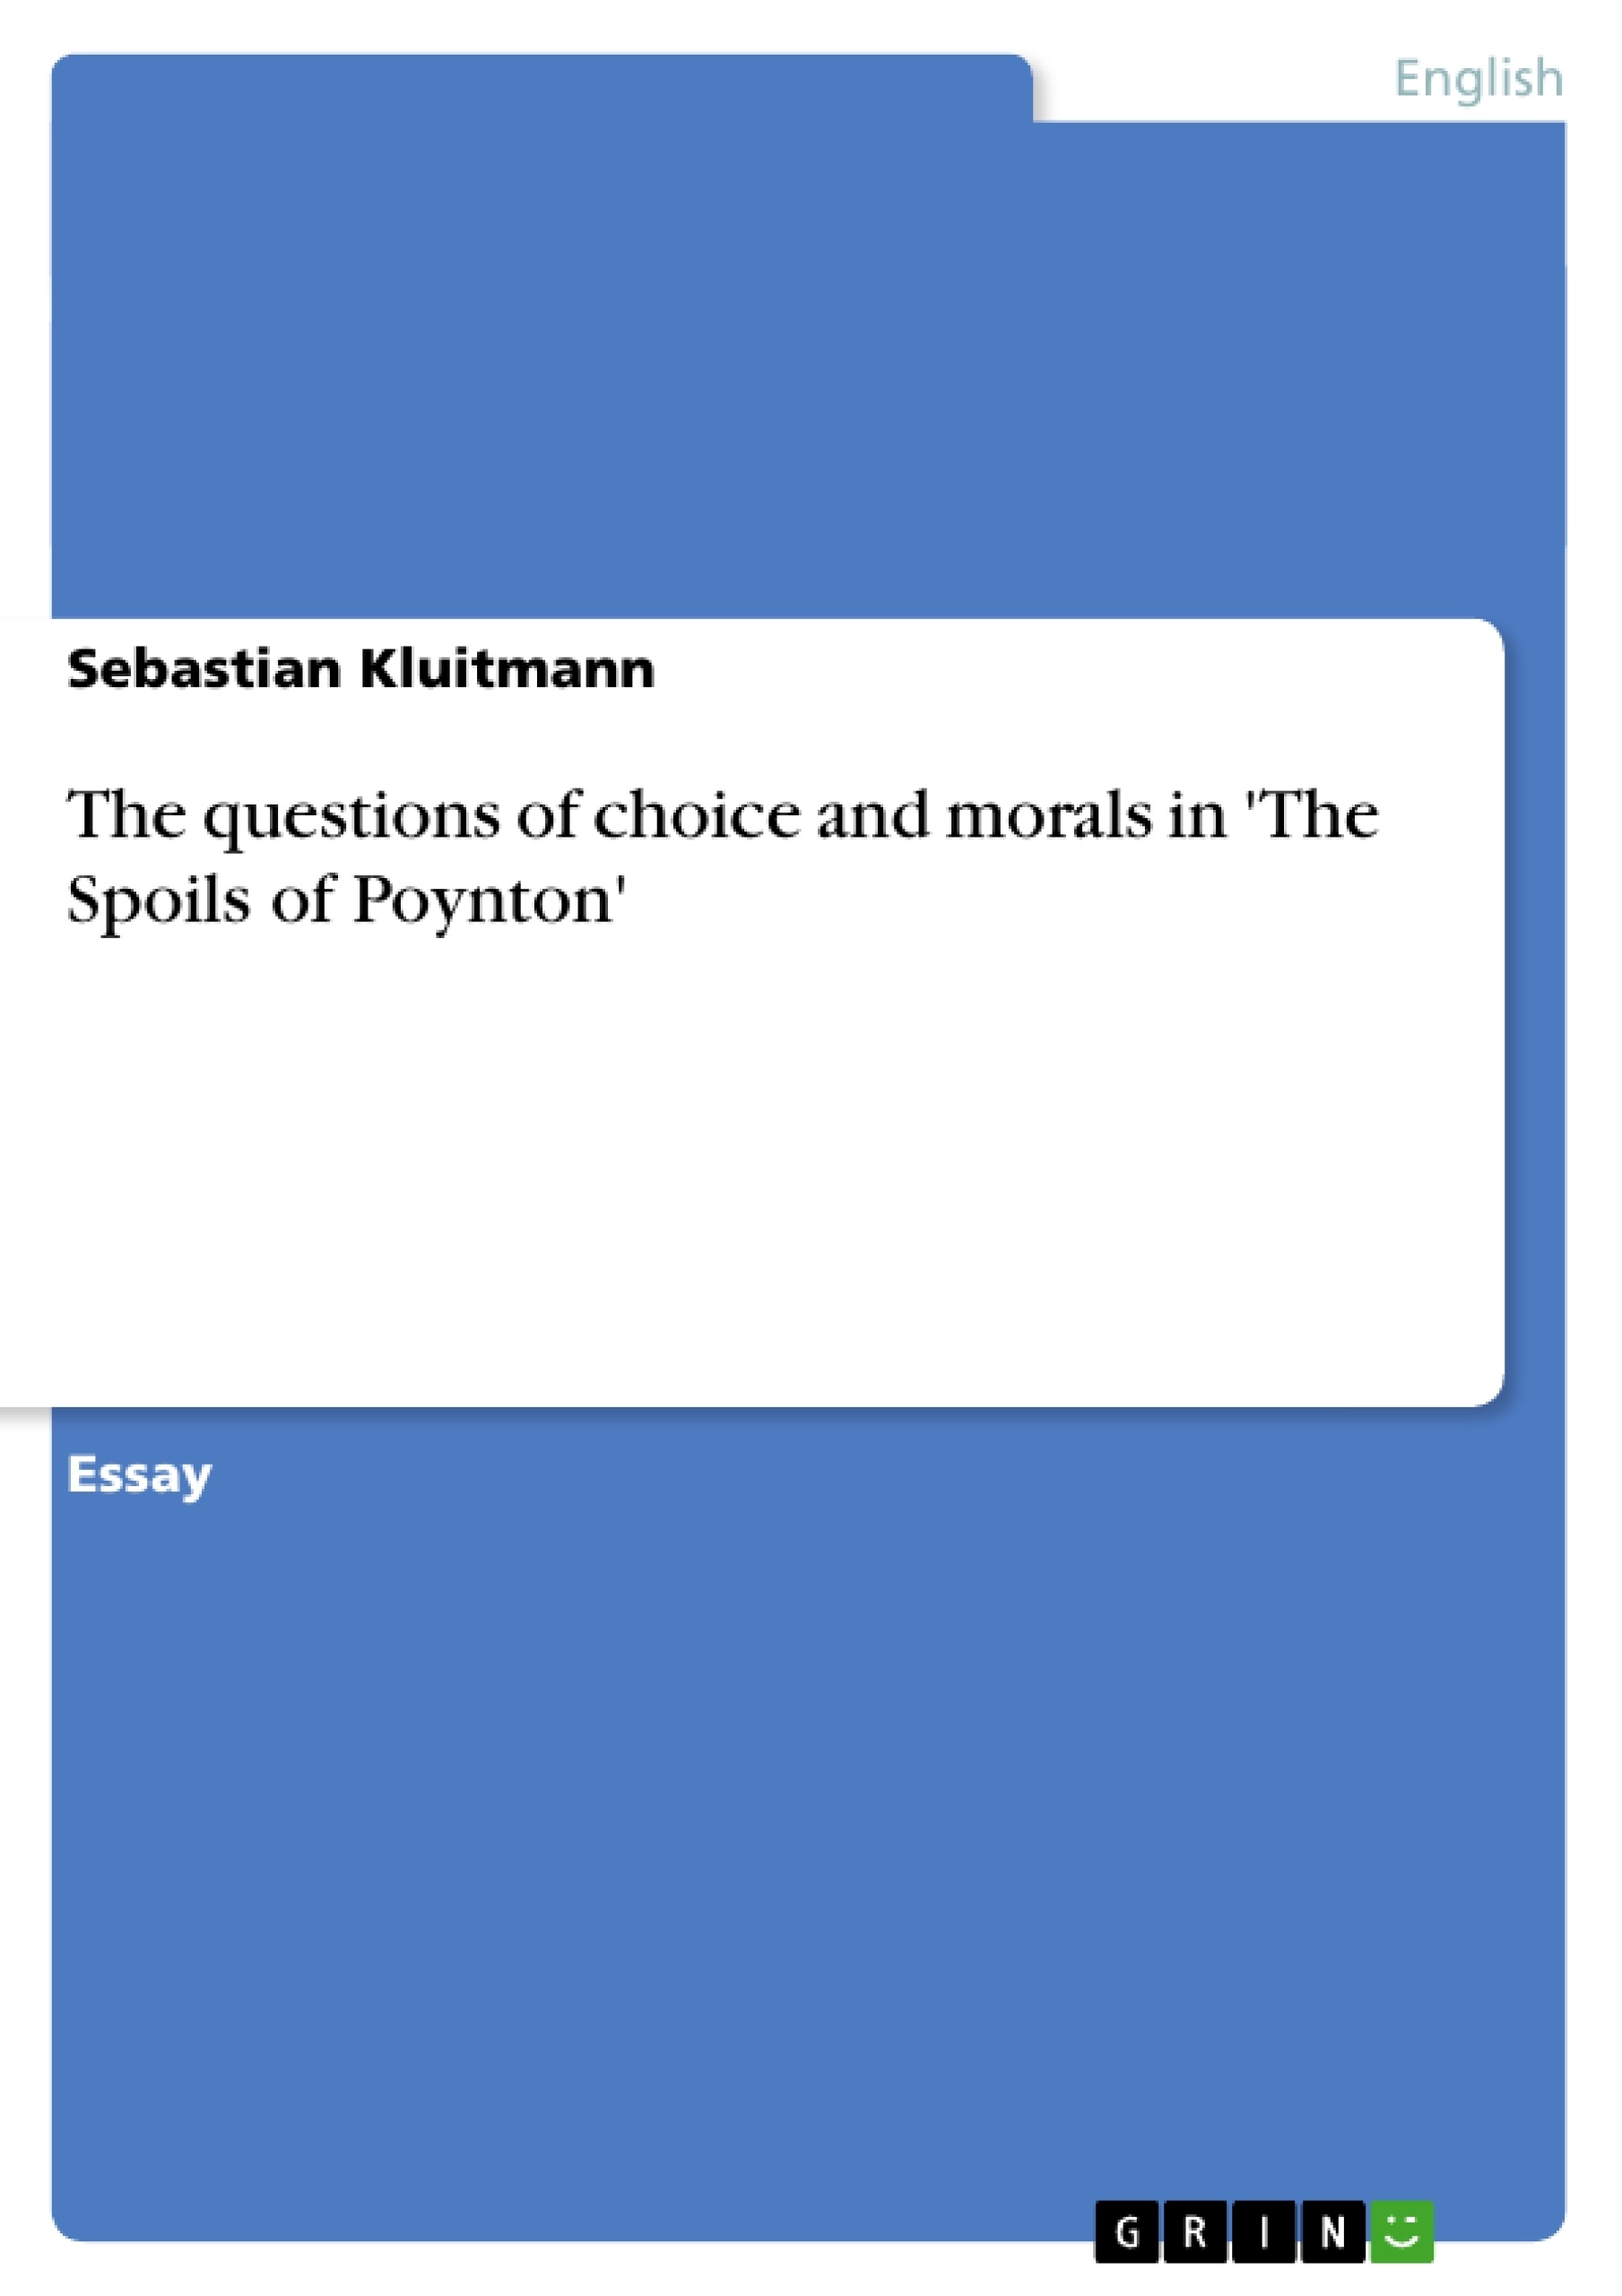 Título: The questions of choice and morals in 'The Spoils of Poynton'